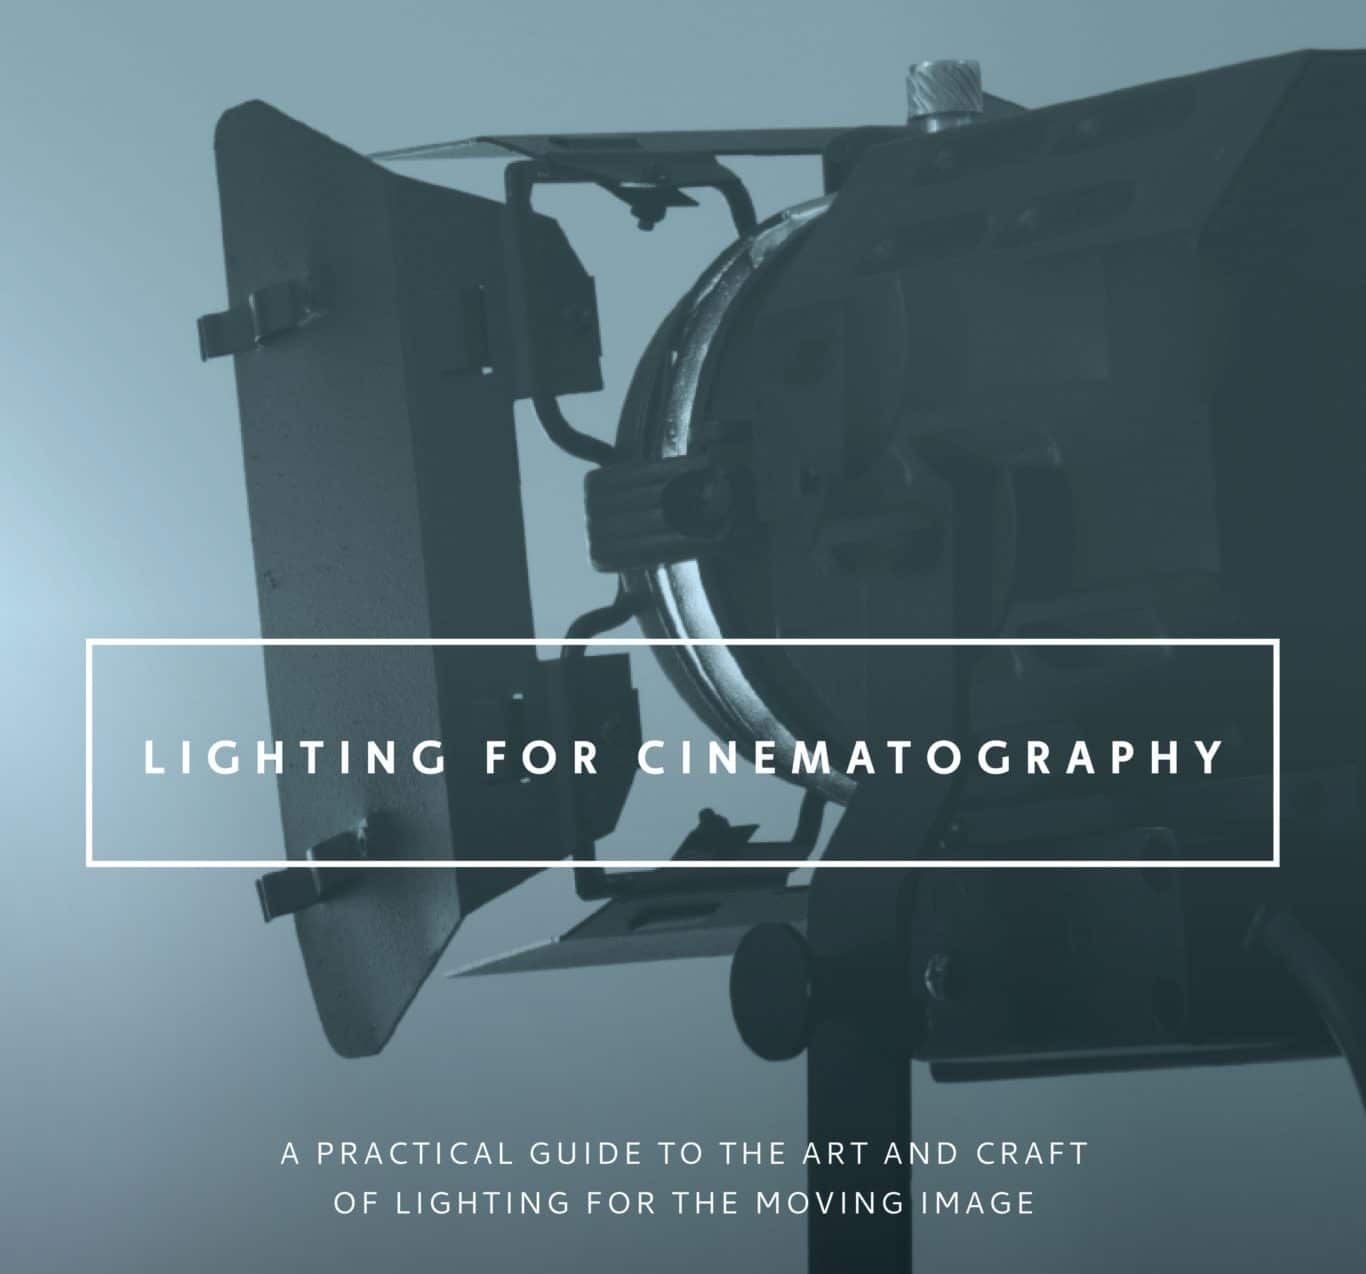 Book Reviews | "Lighting for Cinematography: A Practical Guide to the Art and Craft of Lighting for the Moving Image"